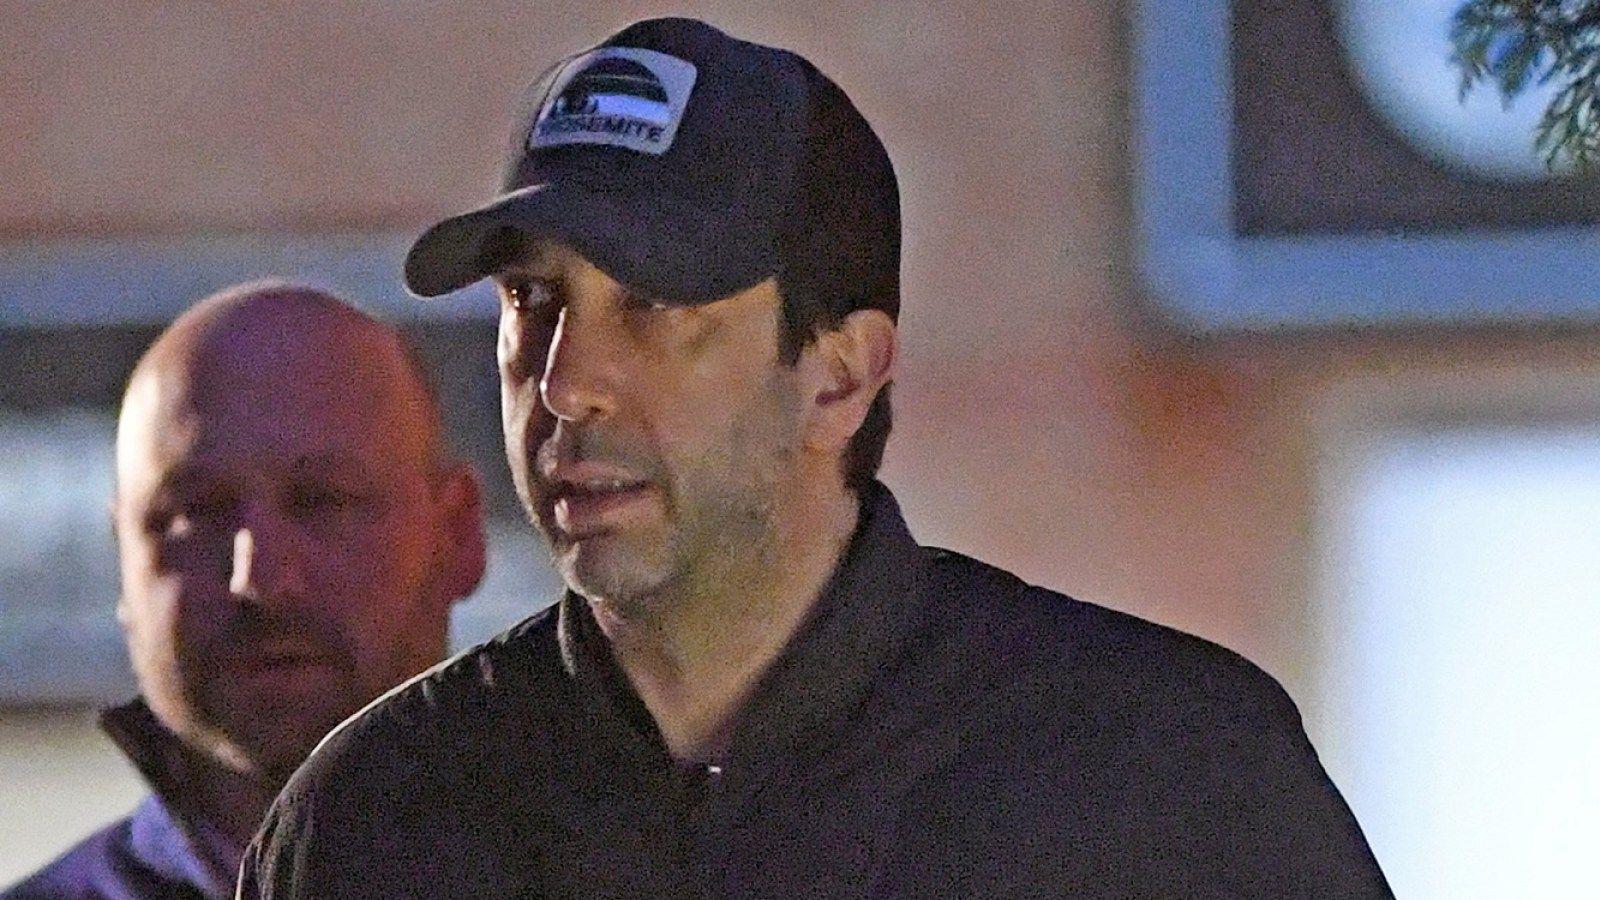 David Schwimmer Steps Out Without Wedding Ring After Split